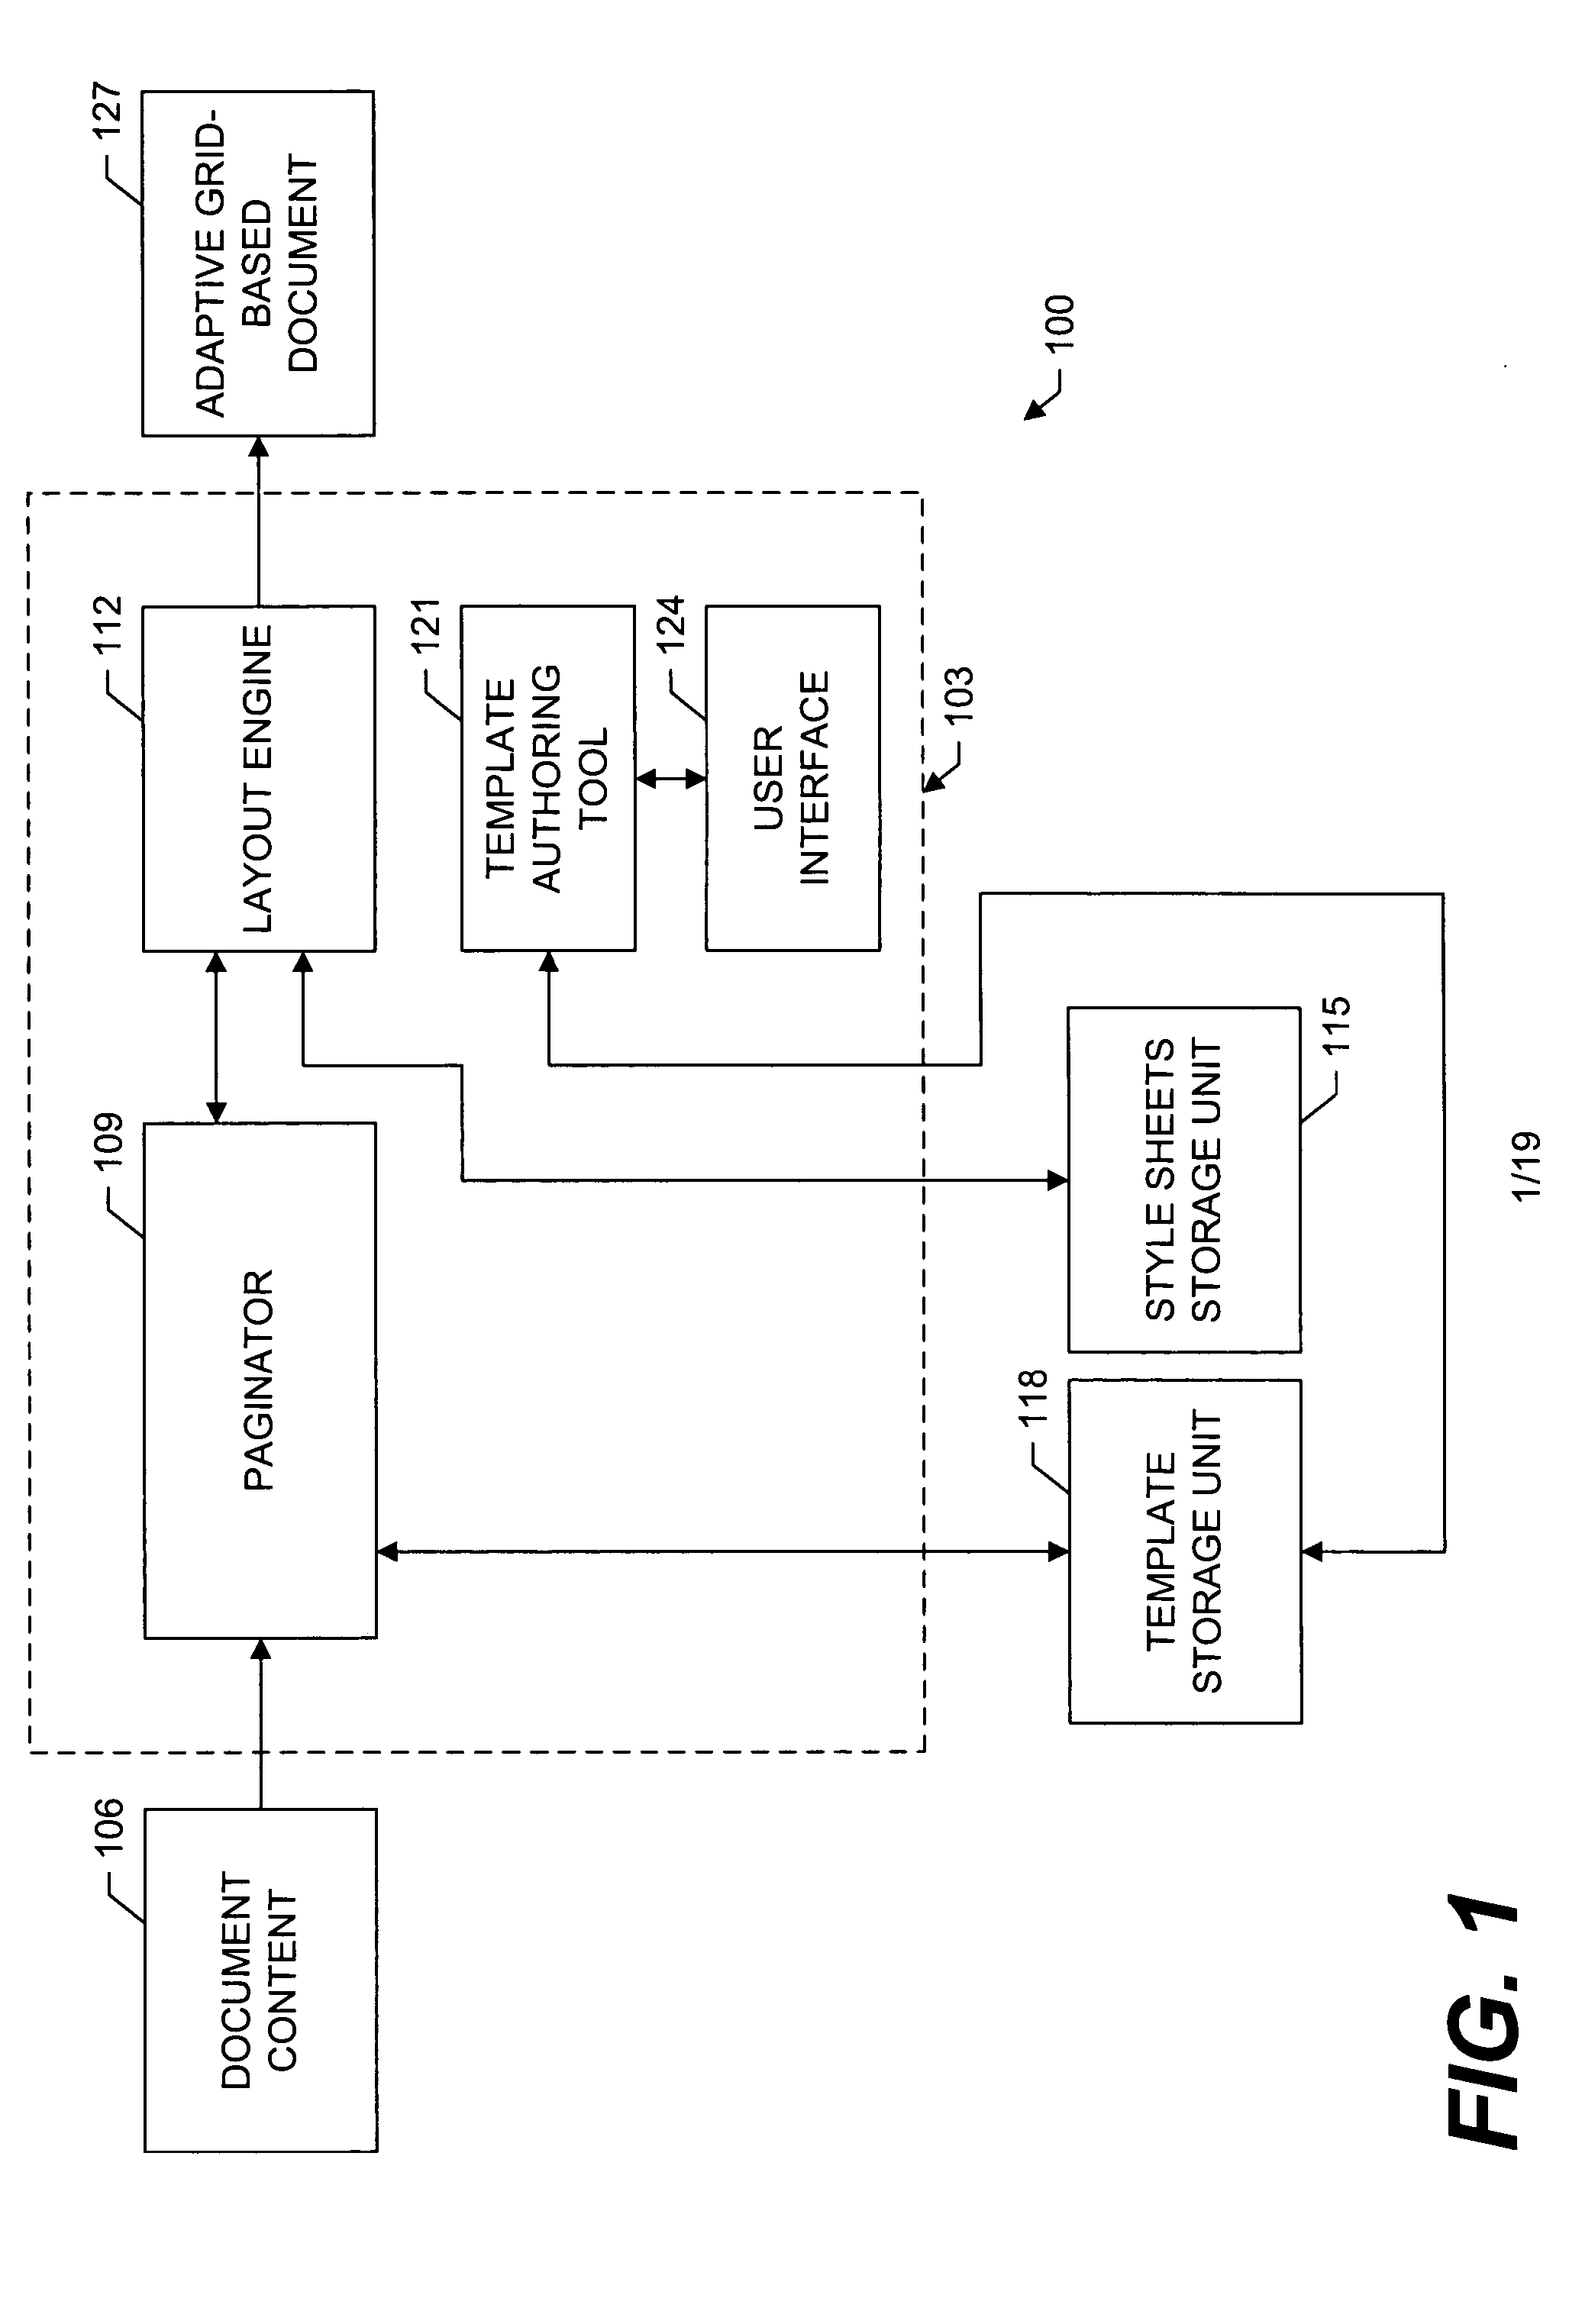 System and methods for facilitating adaptive grid-based document layout